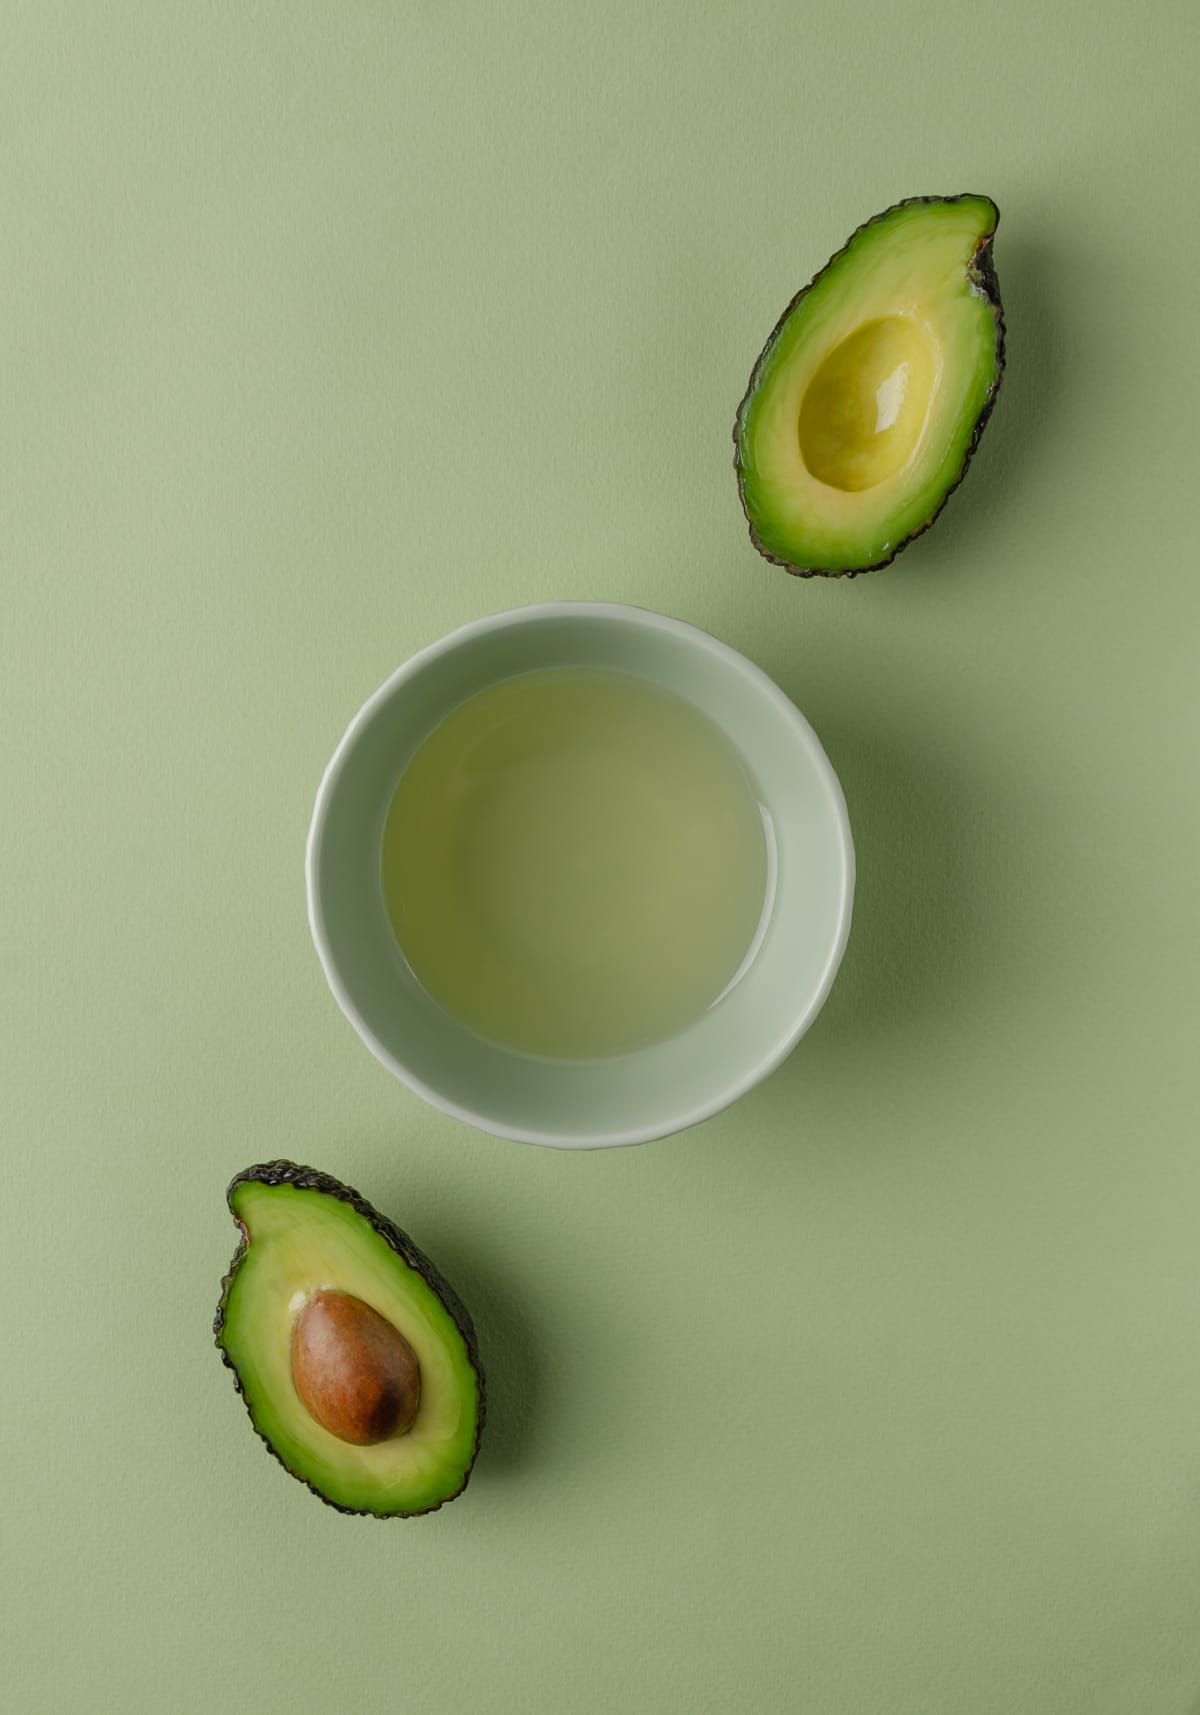 An avocado cu in half with each half on either side of a bowl of oil 